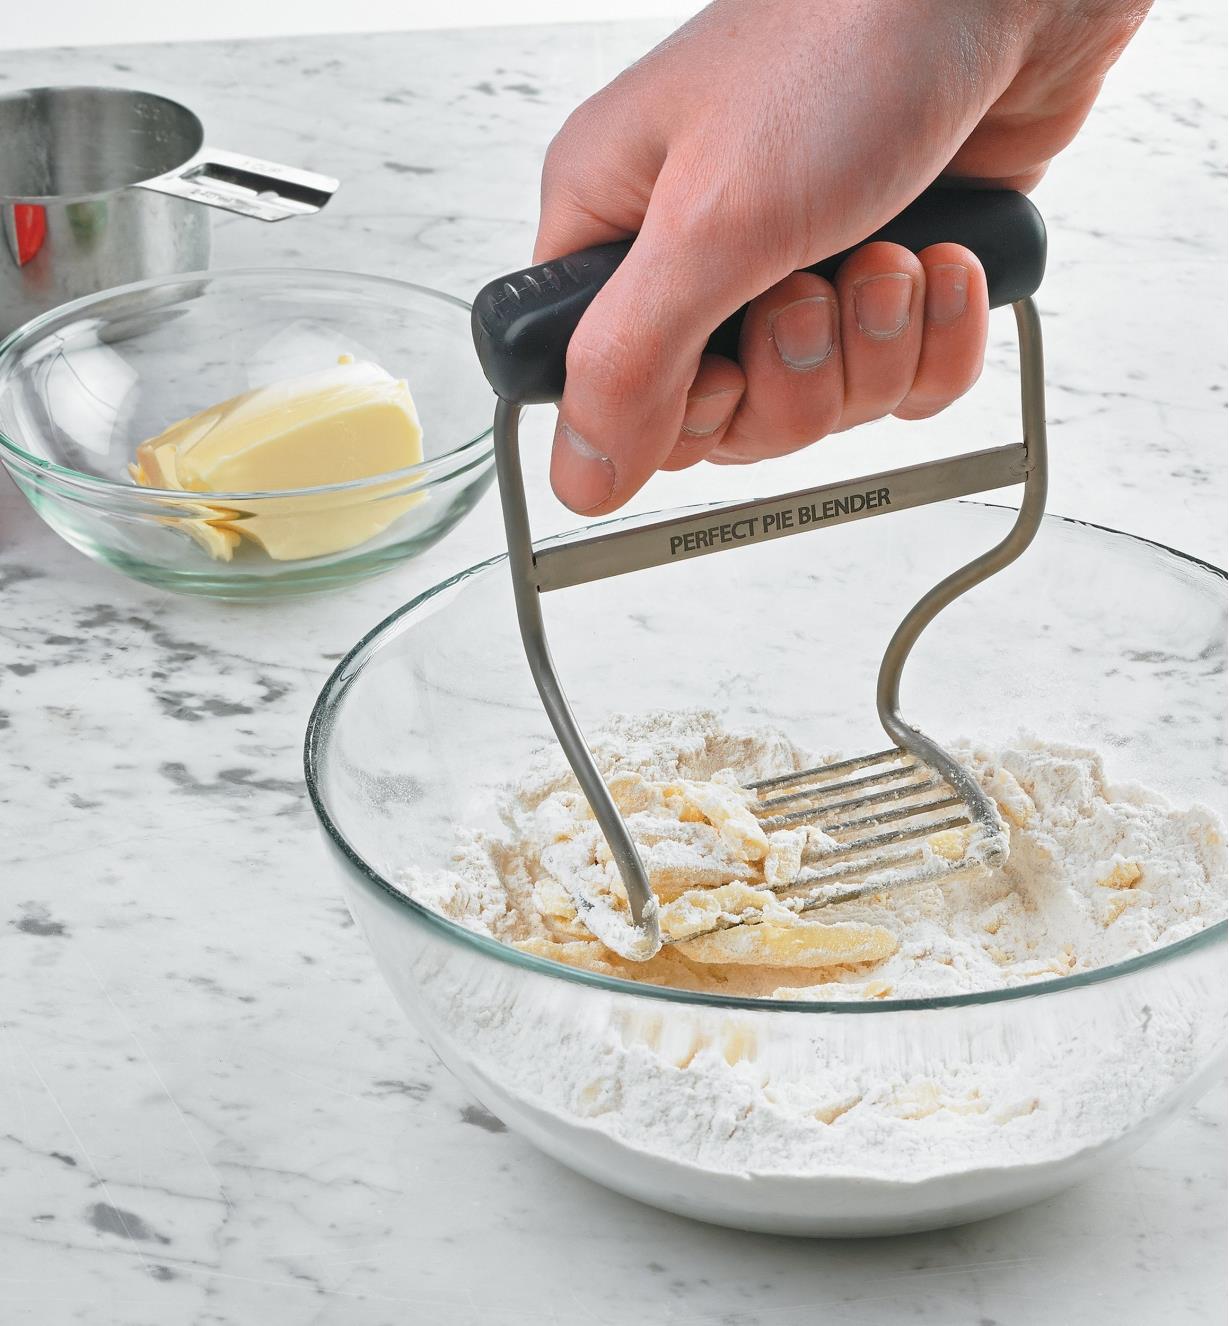 Blending butter and flour in a bowl using the Pastry Blender